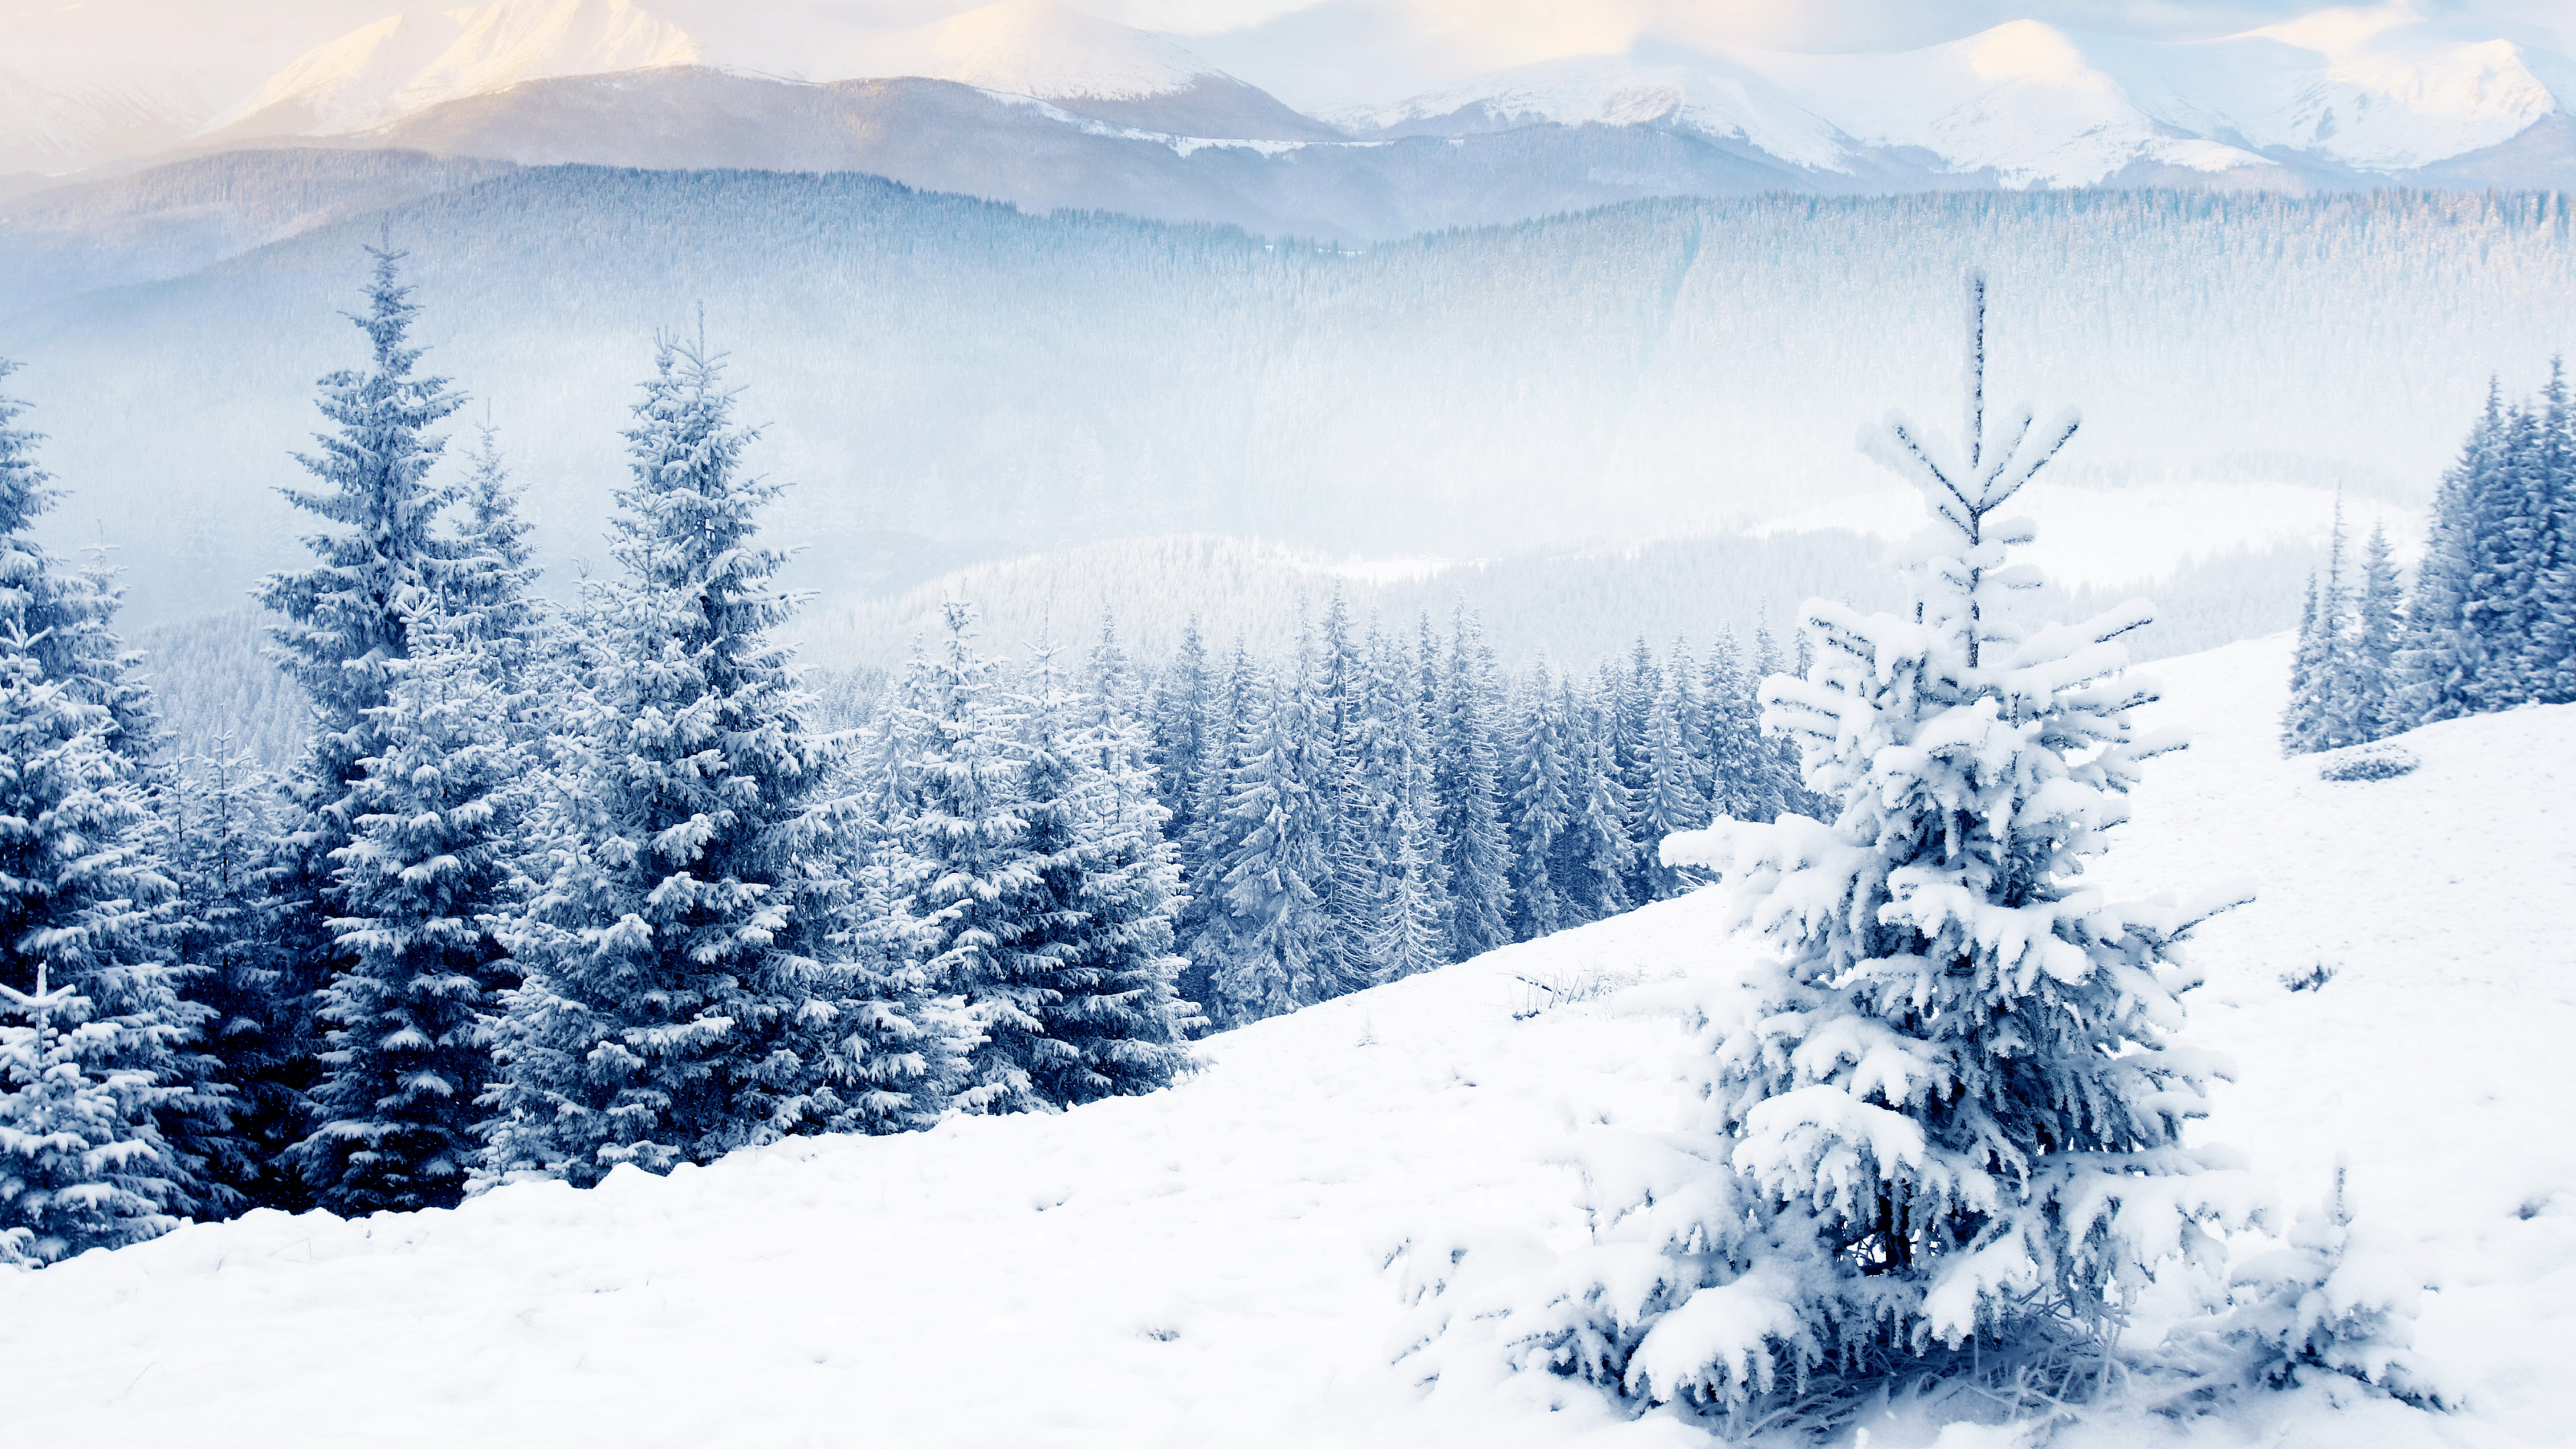 Snow Covered Pine Trees and Mountains During Daytime. Wallpaper in 3840x2160 Resolution